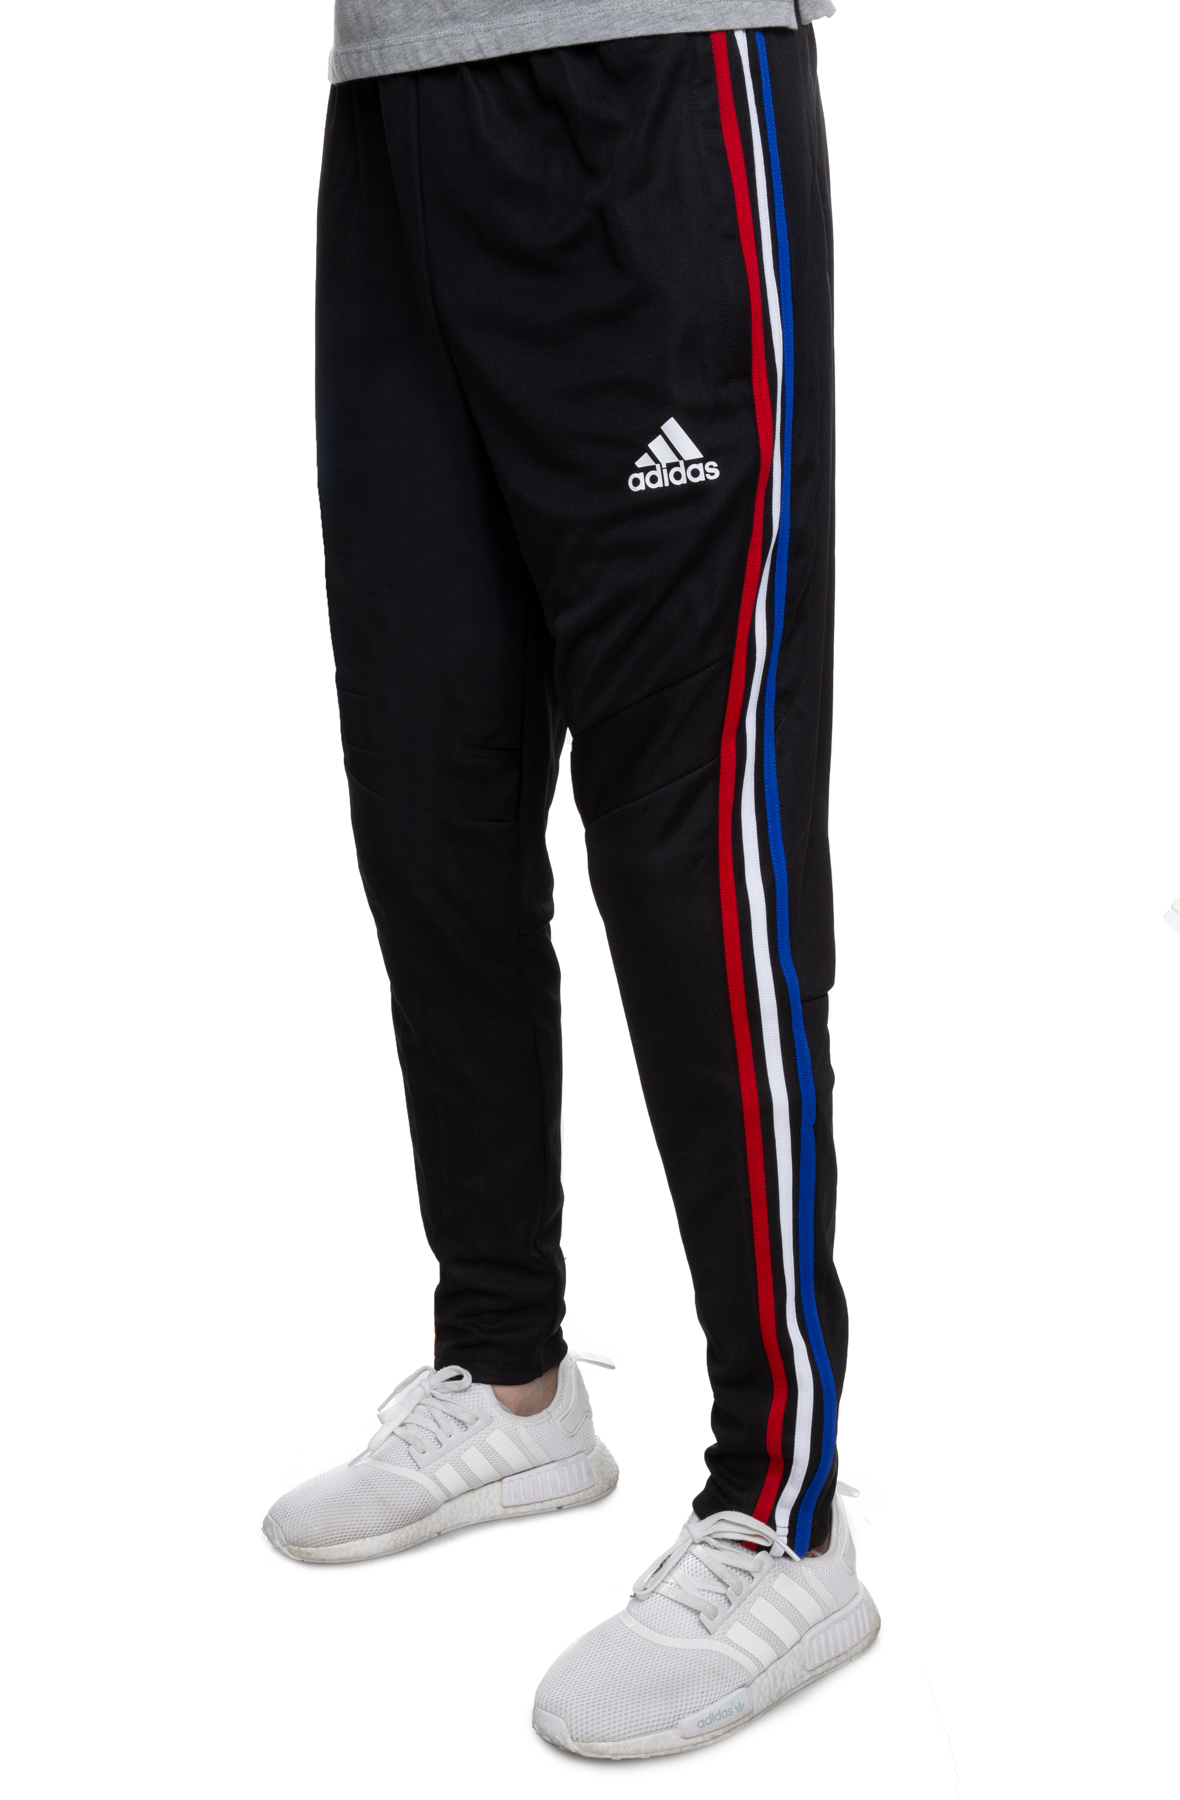 adidas red white blue pants